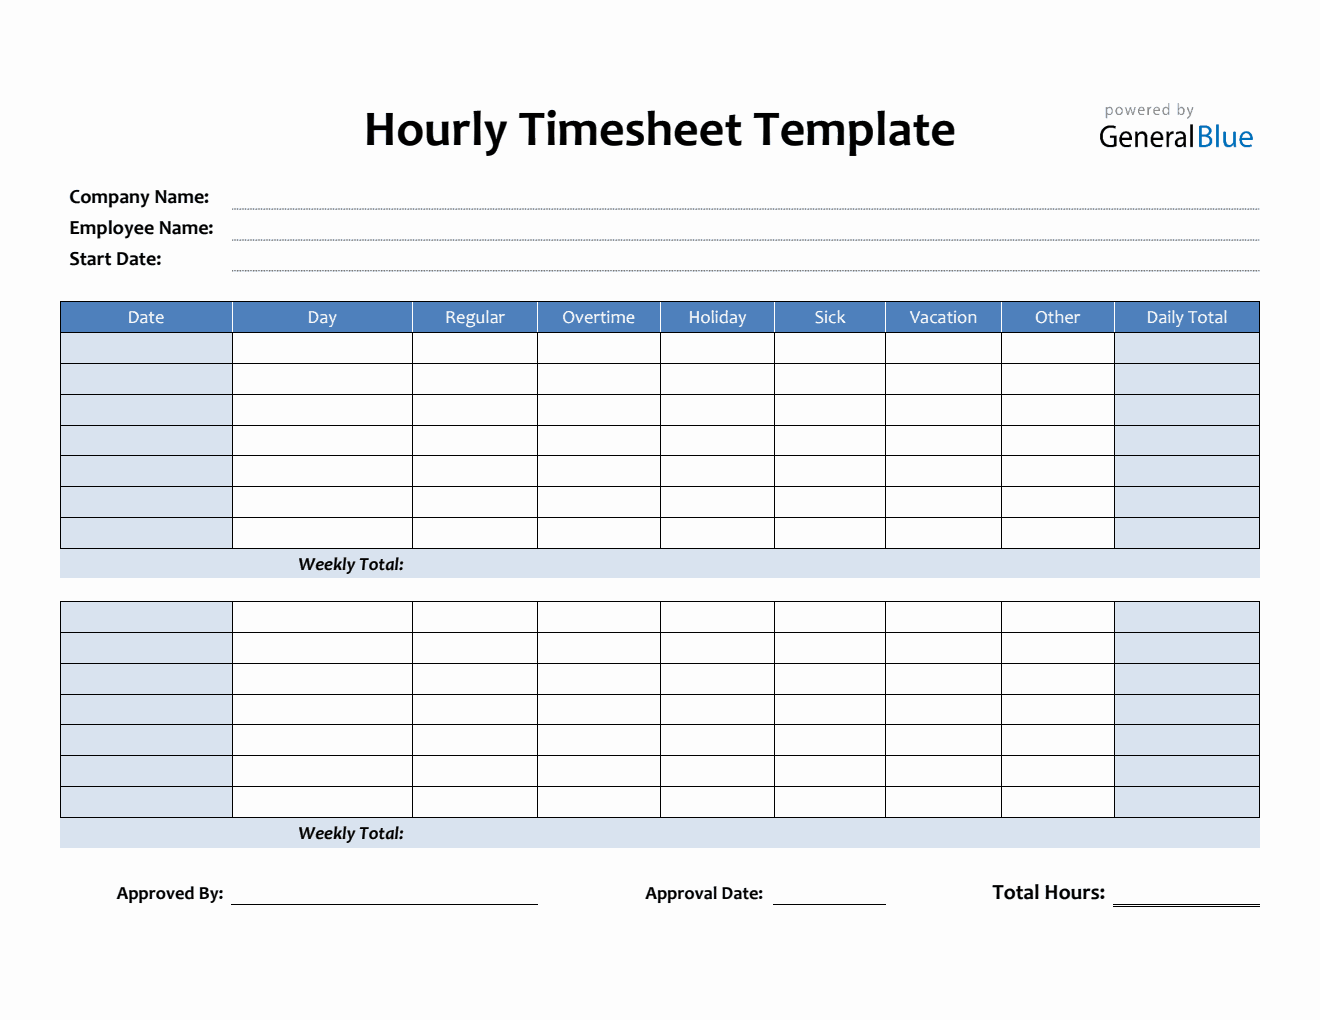 Hourly Timesheet Template in PDF (Blue)